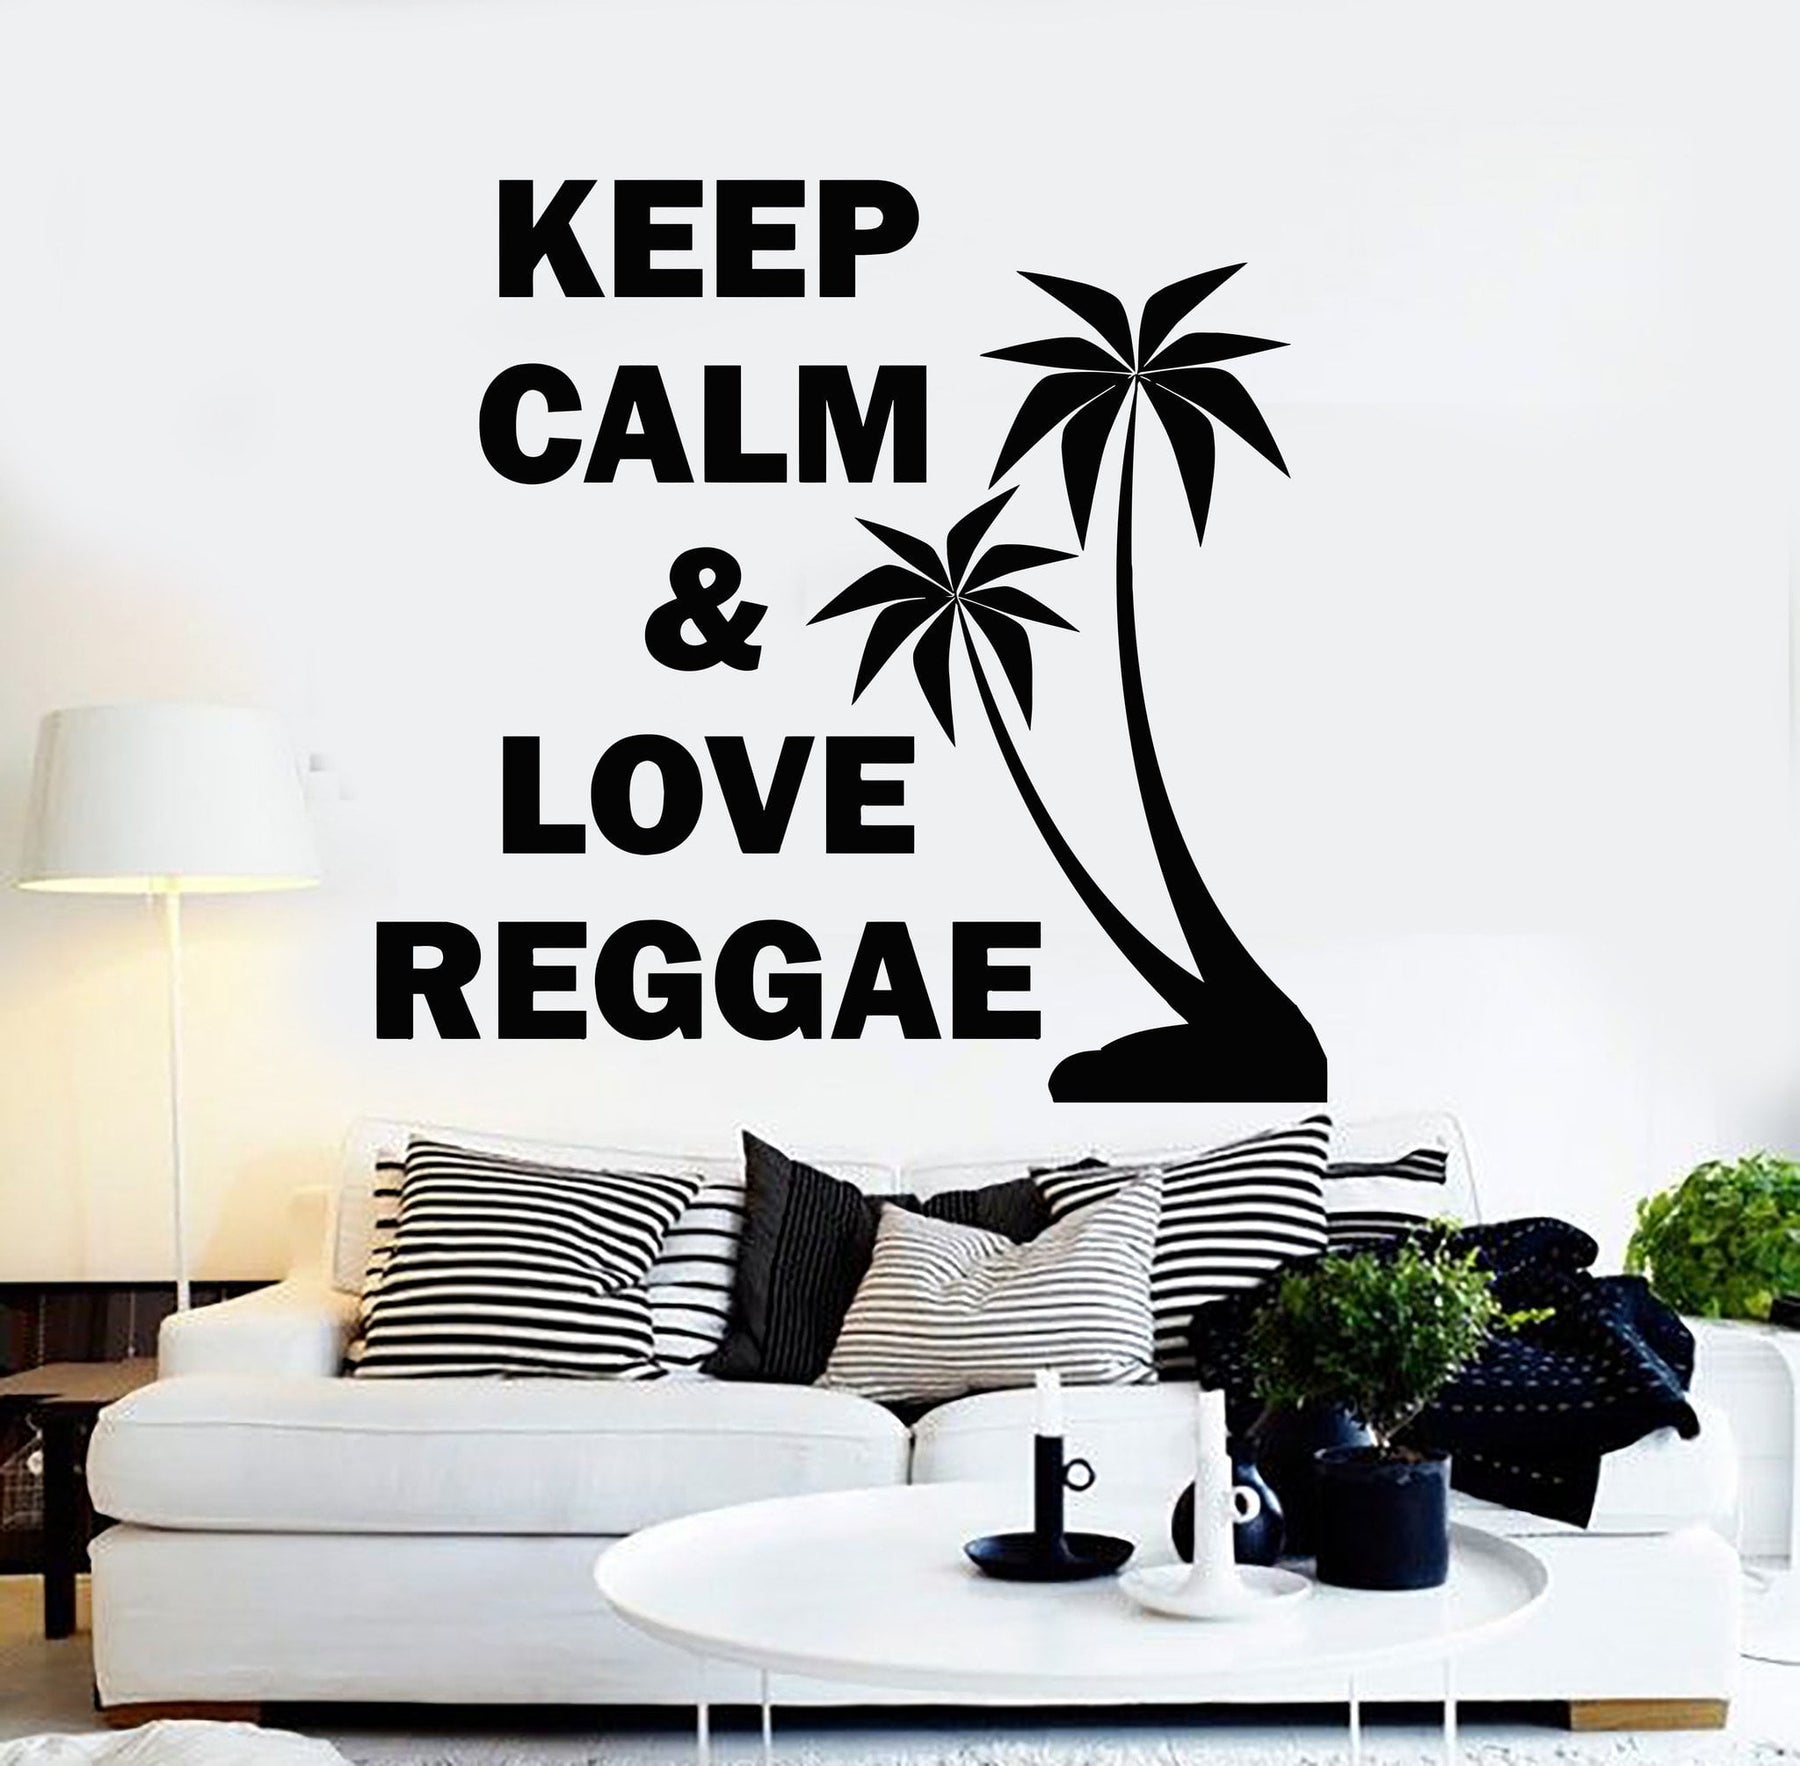 keep calm and love music wallpapers